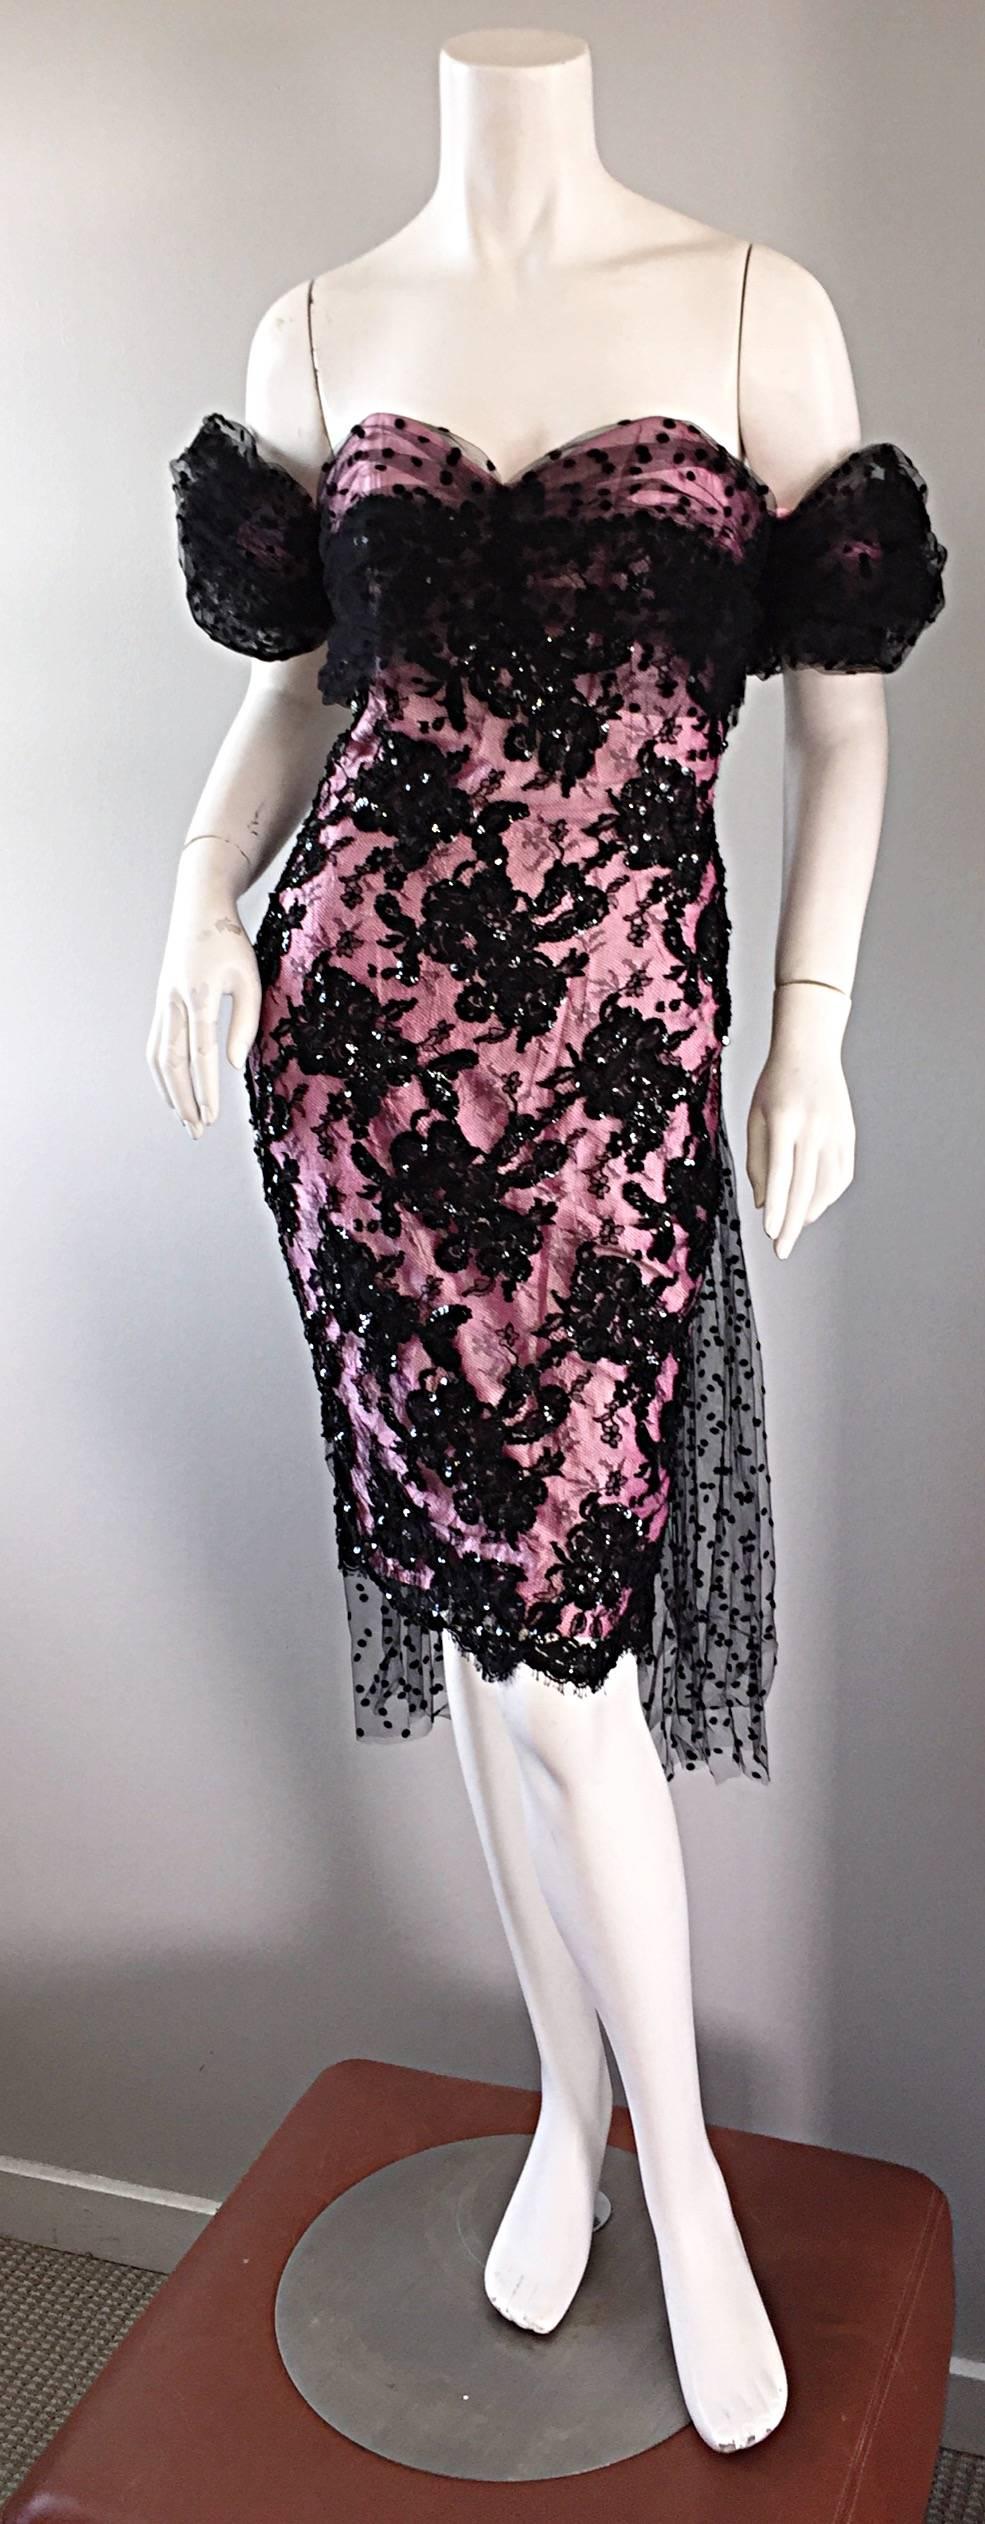 Amazing vintage LILLIE RUBIN pink and black silk wiggle dress! Features a pink strapless dress, with an all over black French lace overlay, encrusted with hundreds of hand-sewn black sequins. Black tulle cover the off-shoulder sleeves and bust, and